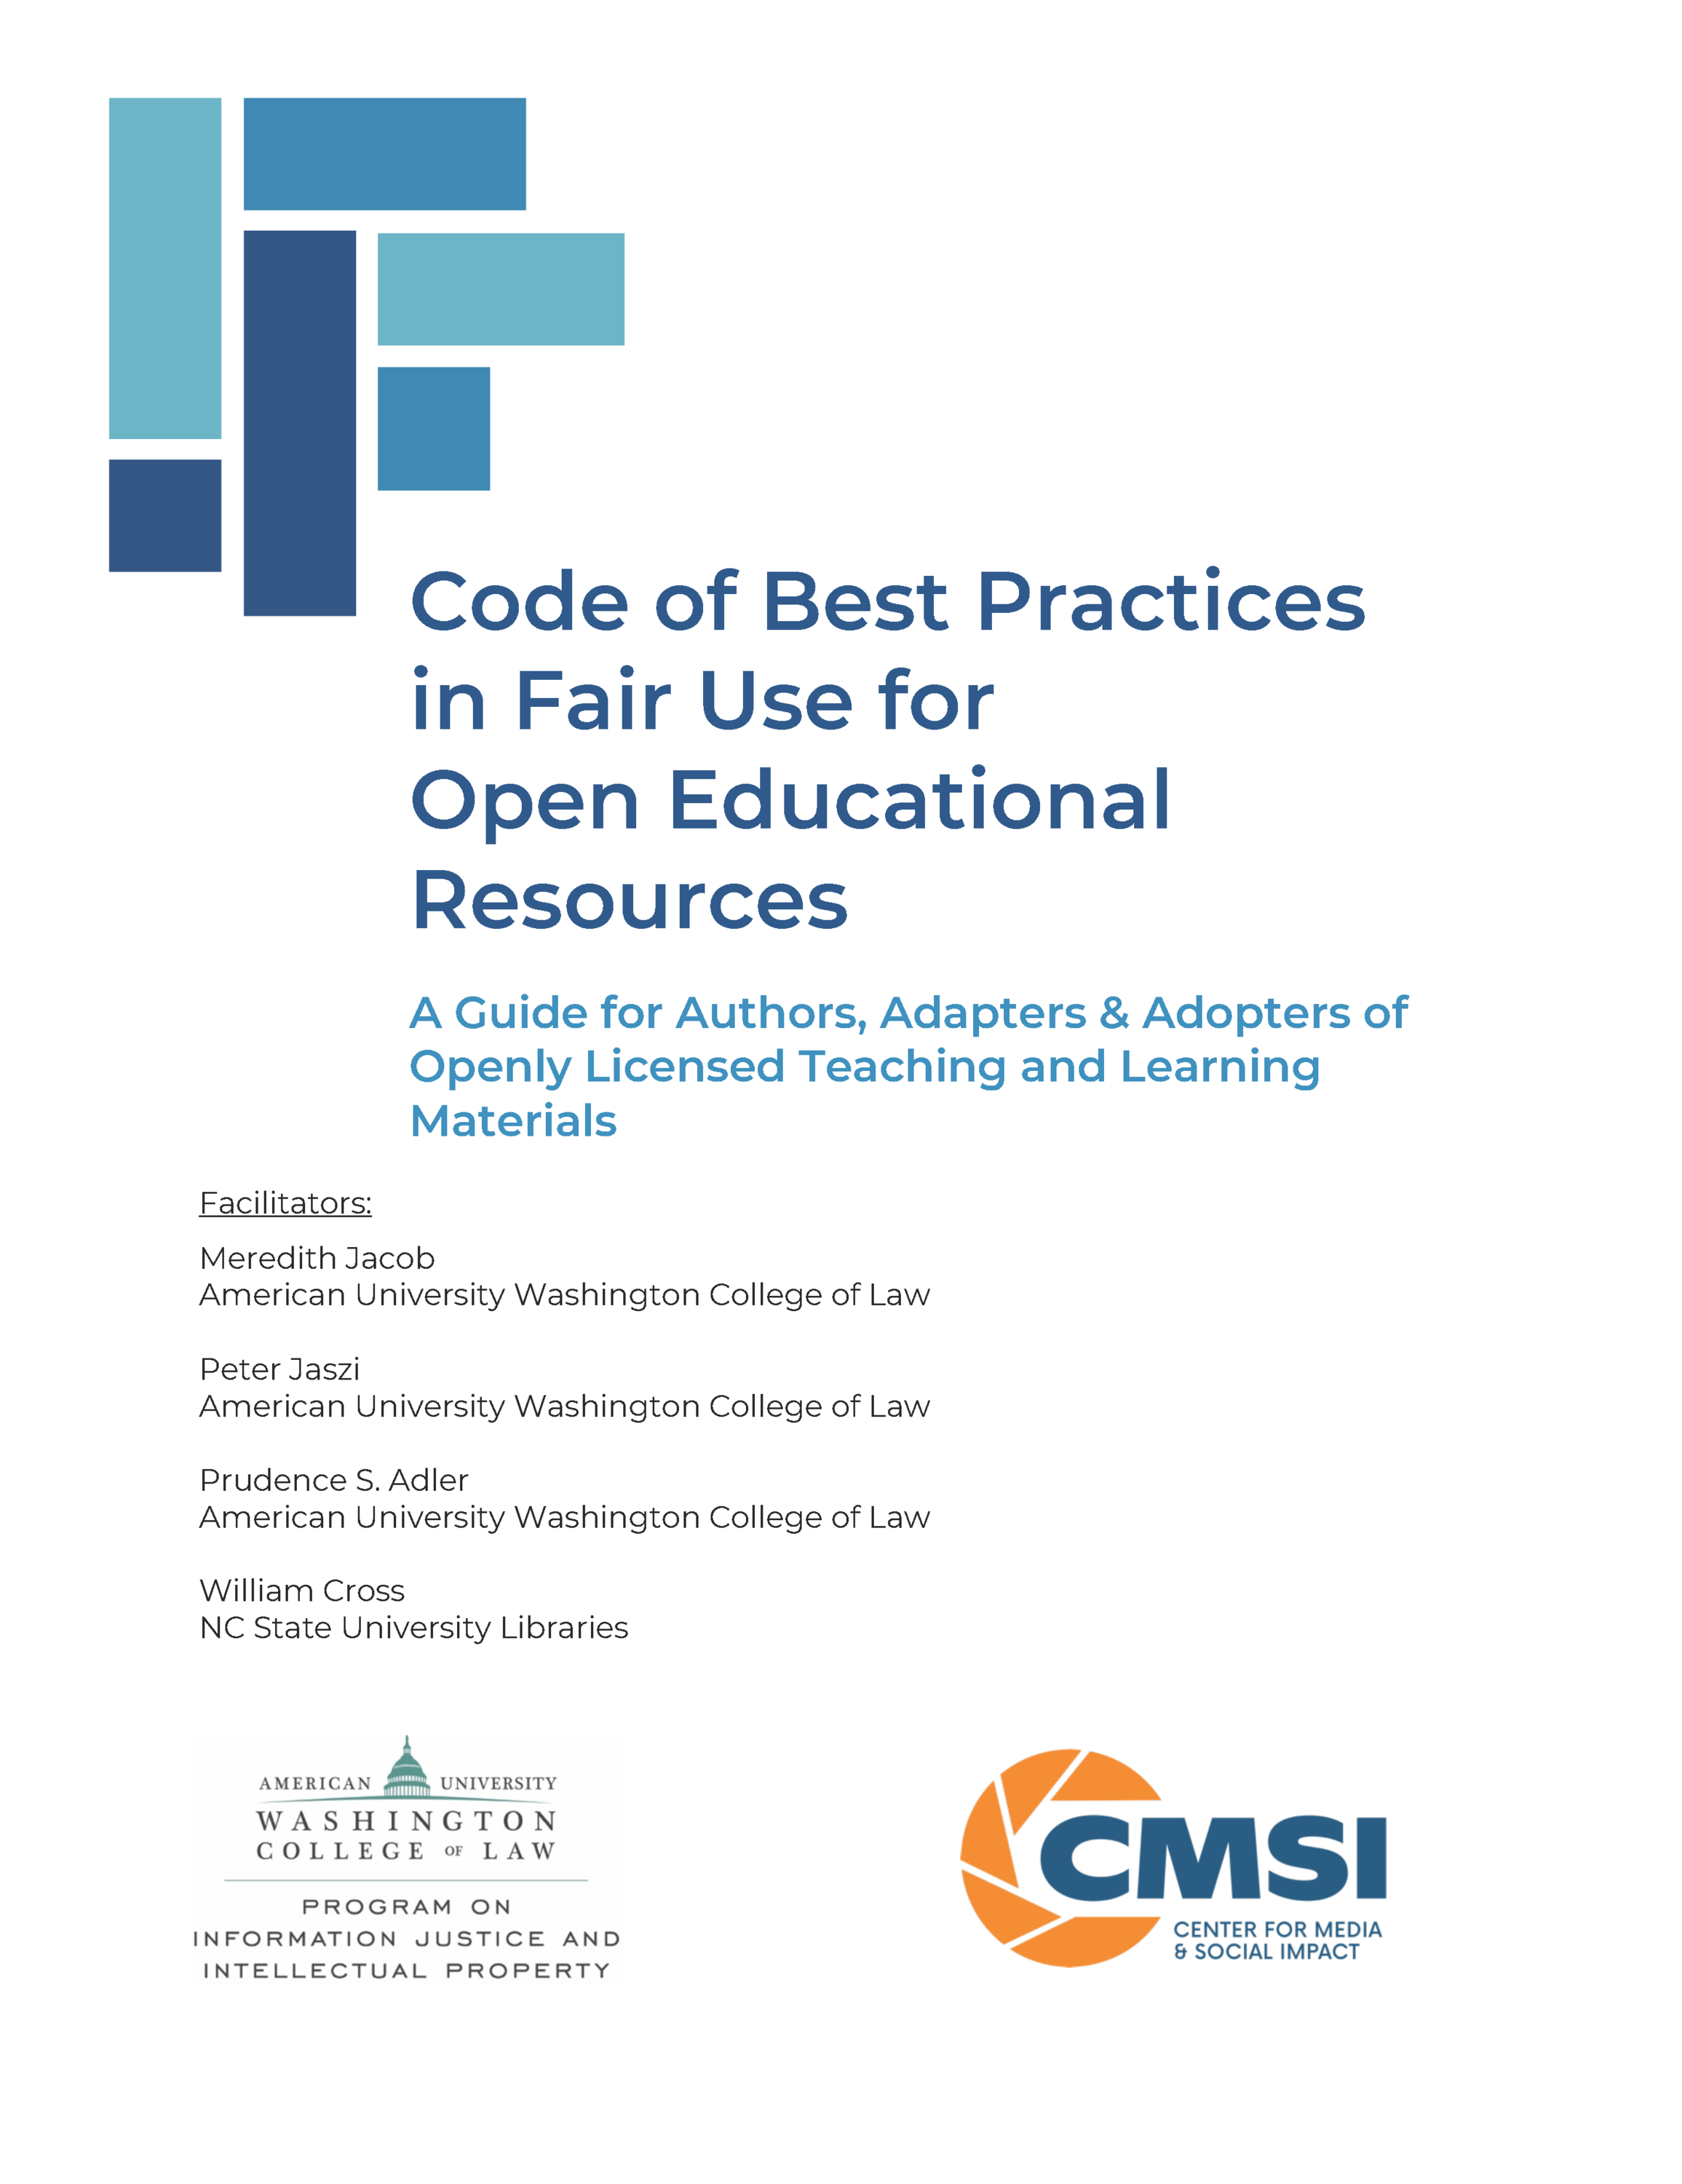 Cover of Best Practice for Fair Use in Open Educational Resources